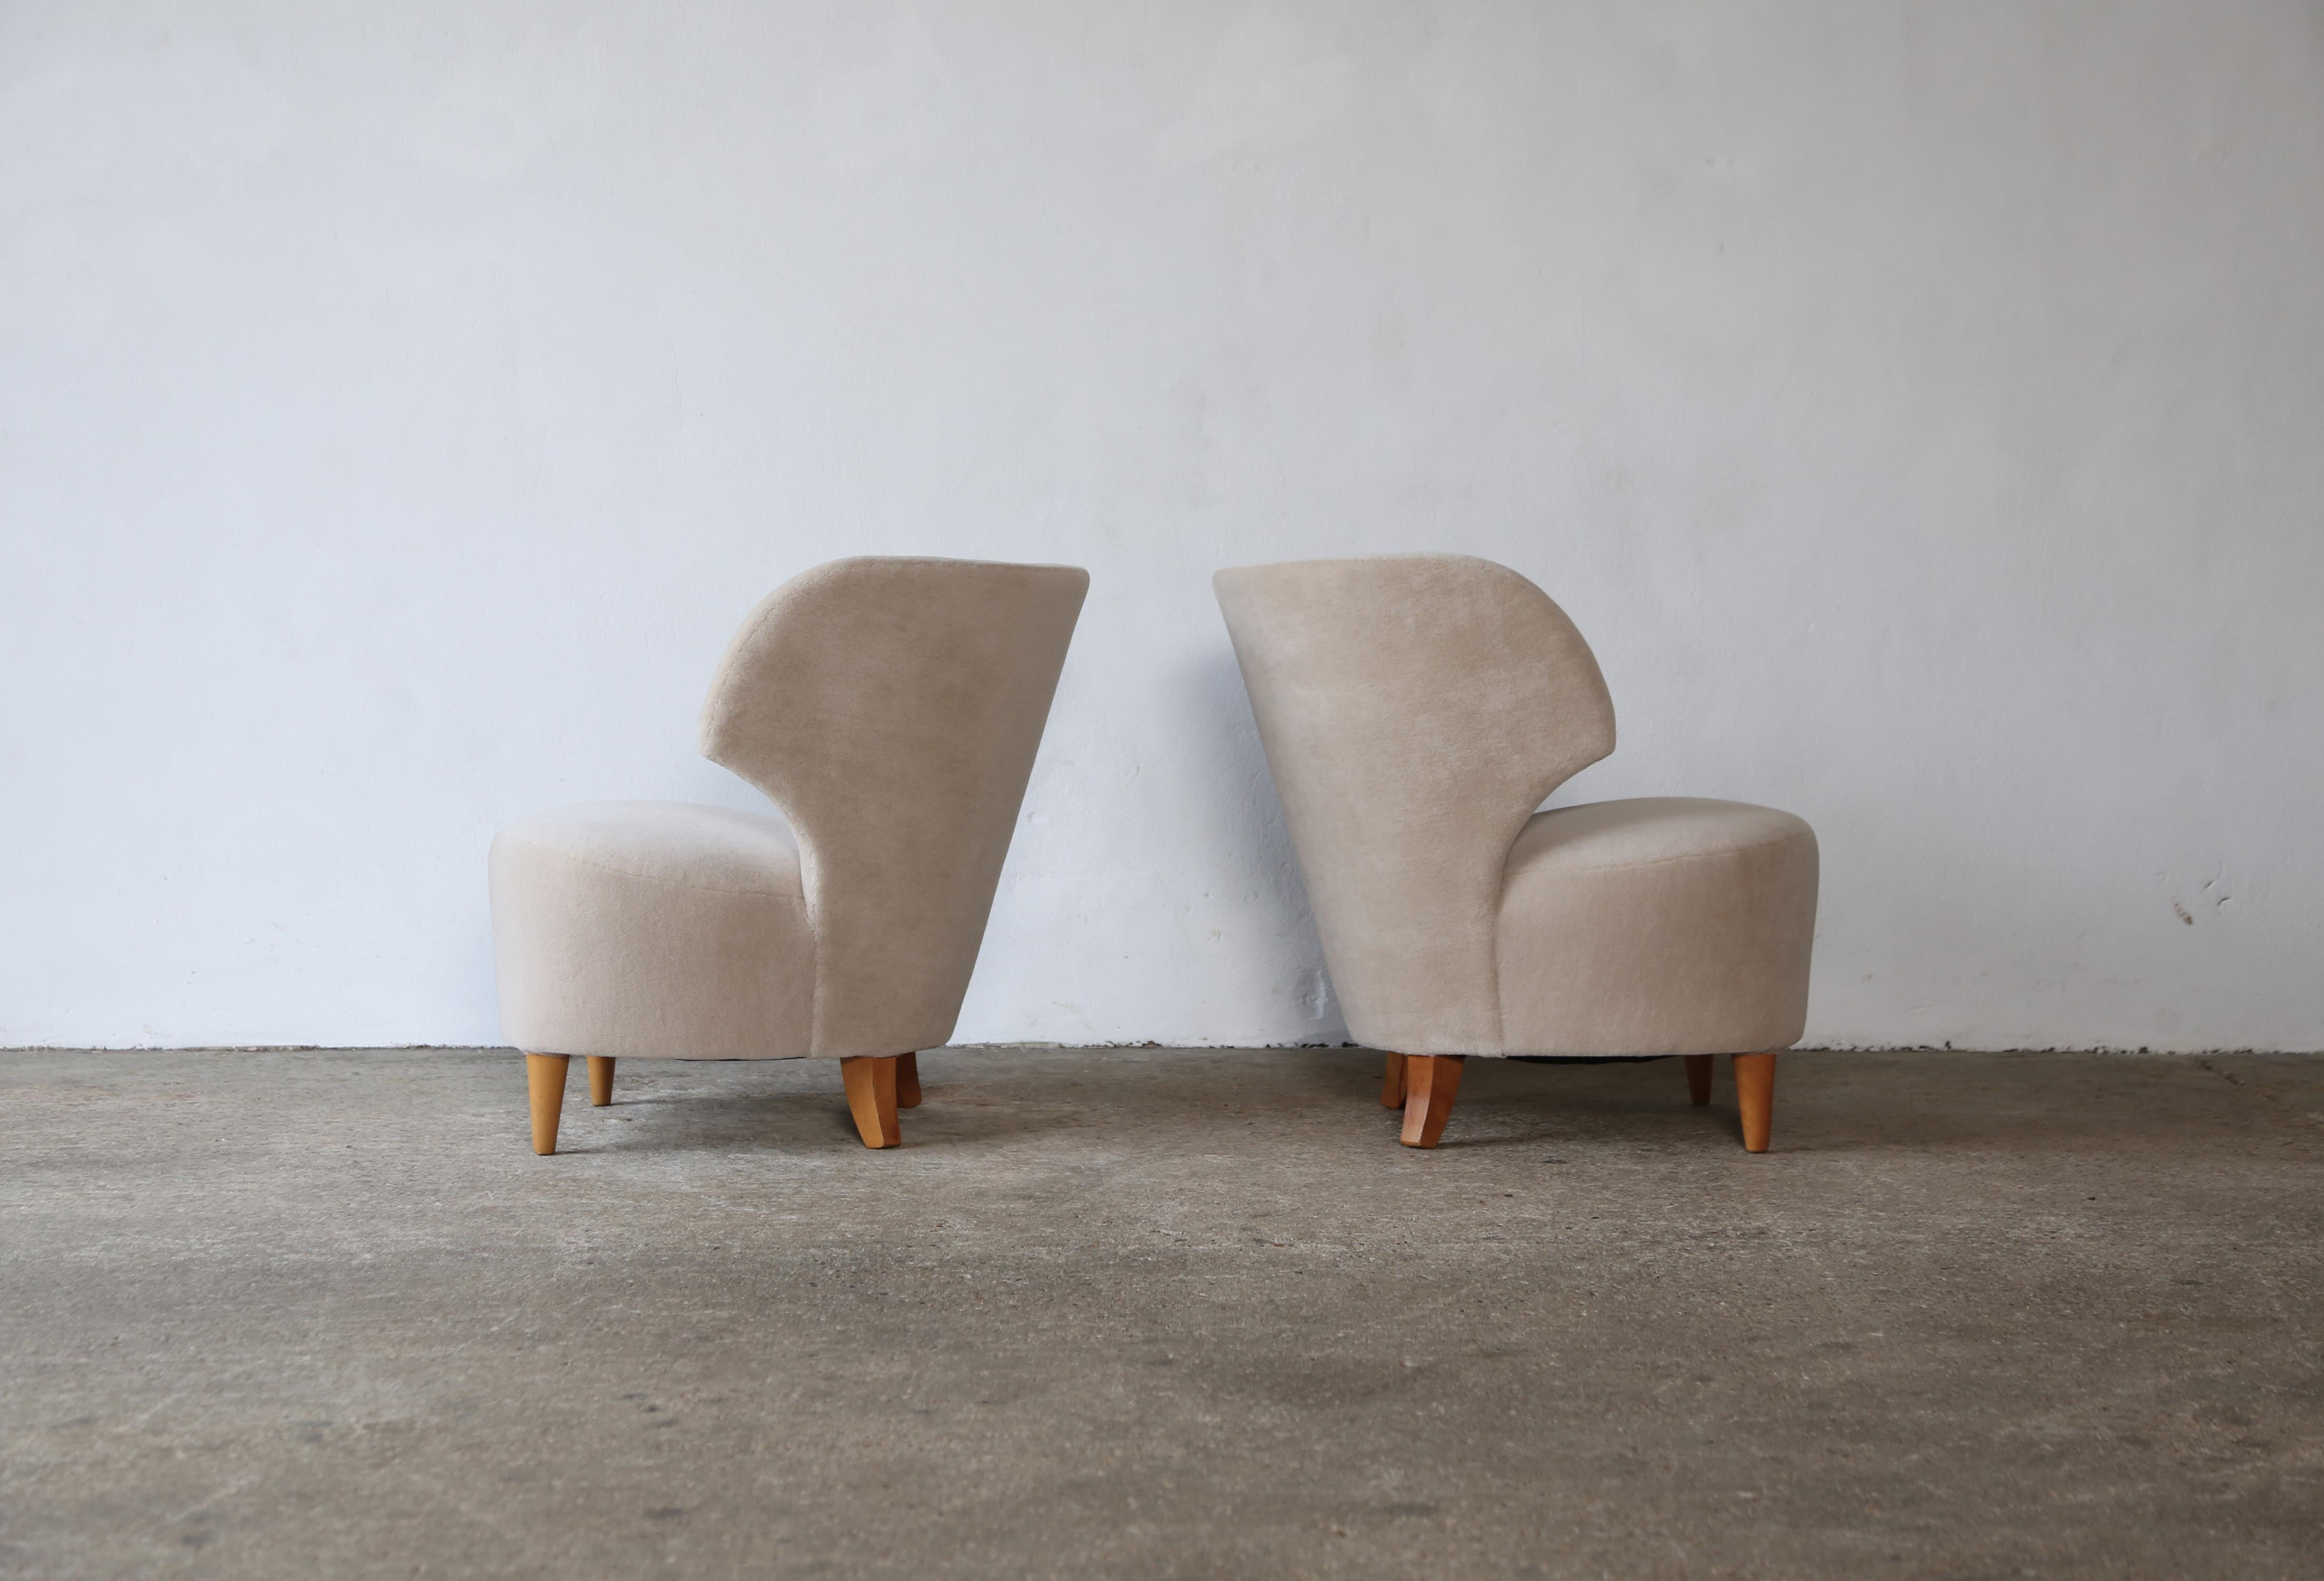 20th Century Pair of Carl-Johan Boman Chairs, Finland, 1940s, Newly Upholstered in Alpaca